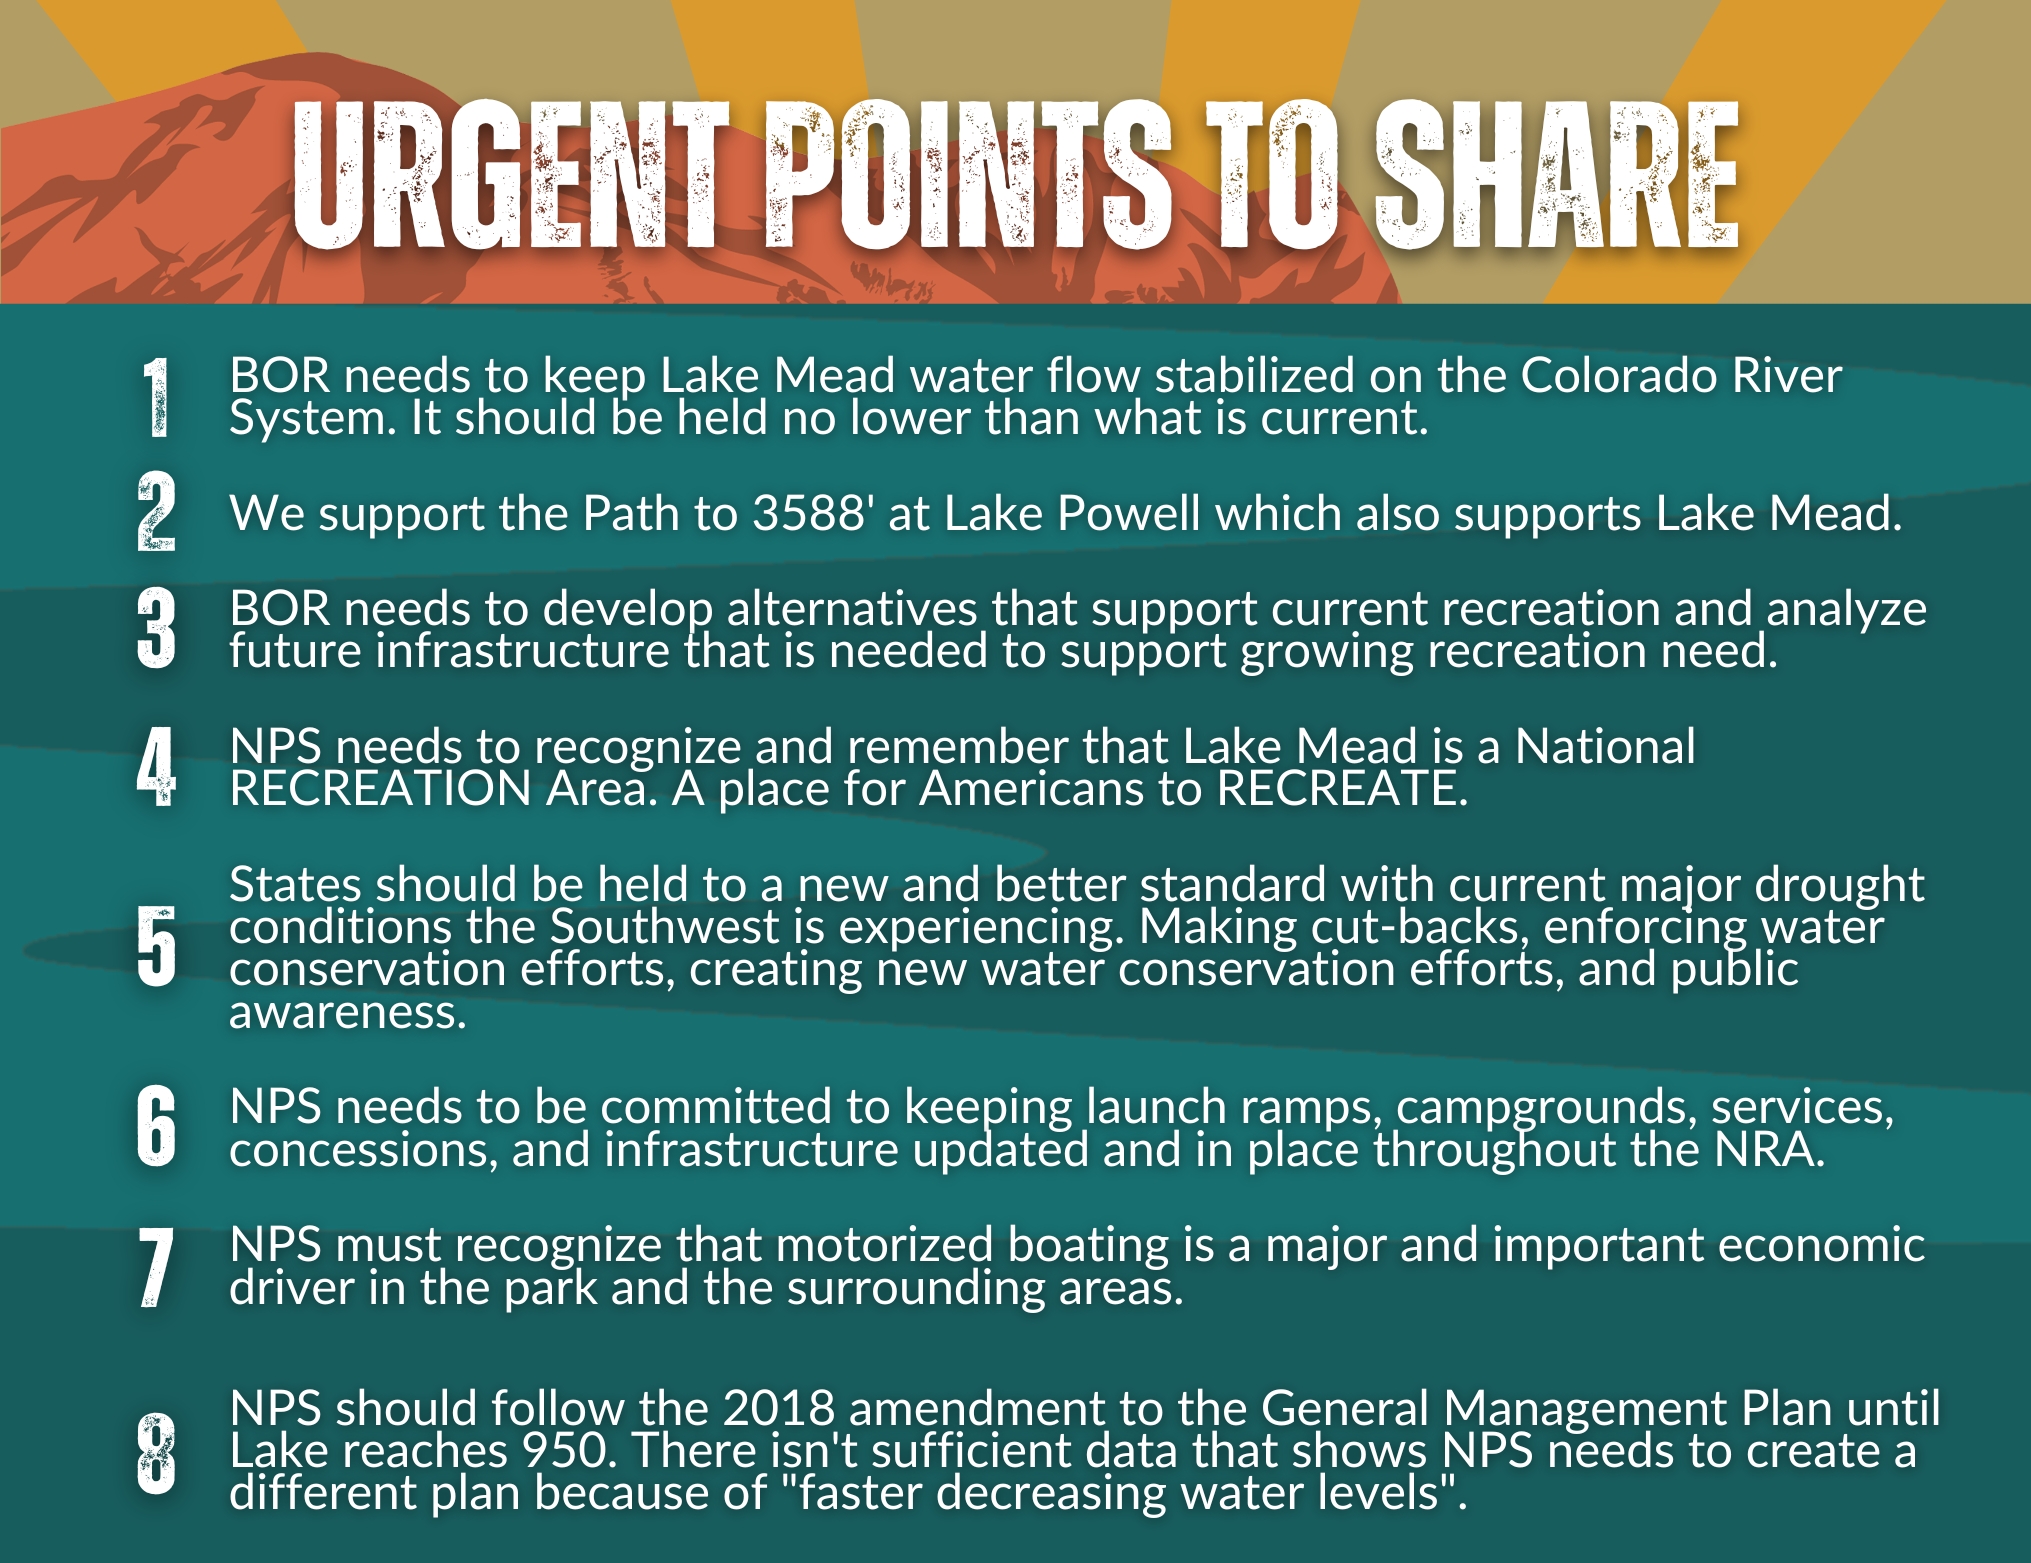 Urgent points to share to save Lake Mead